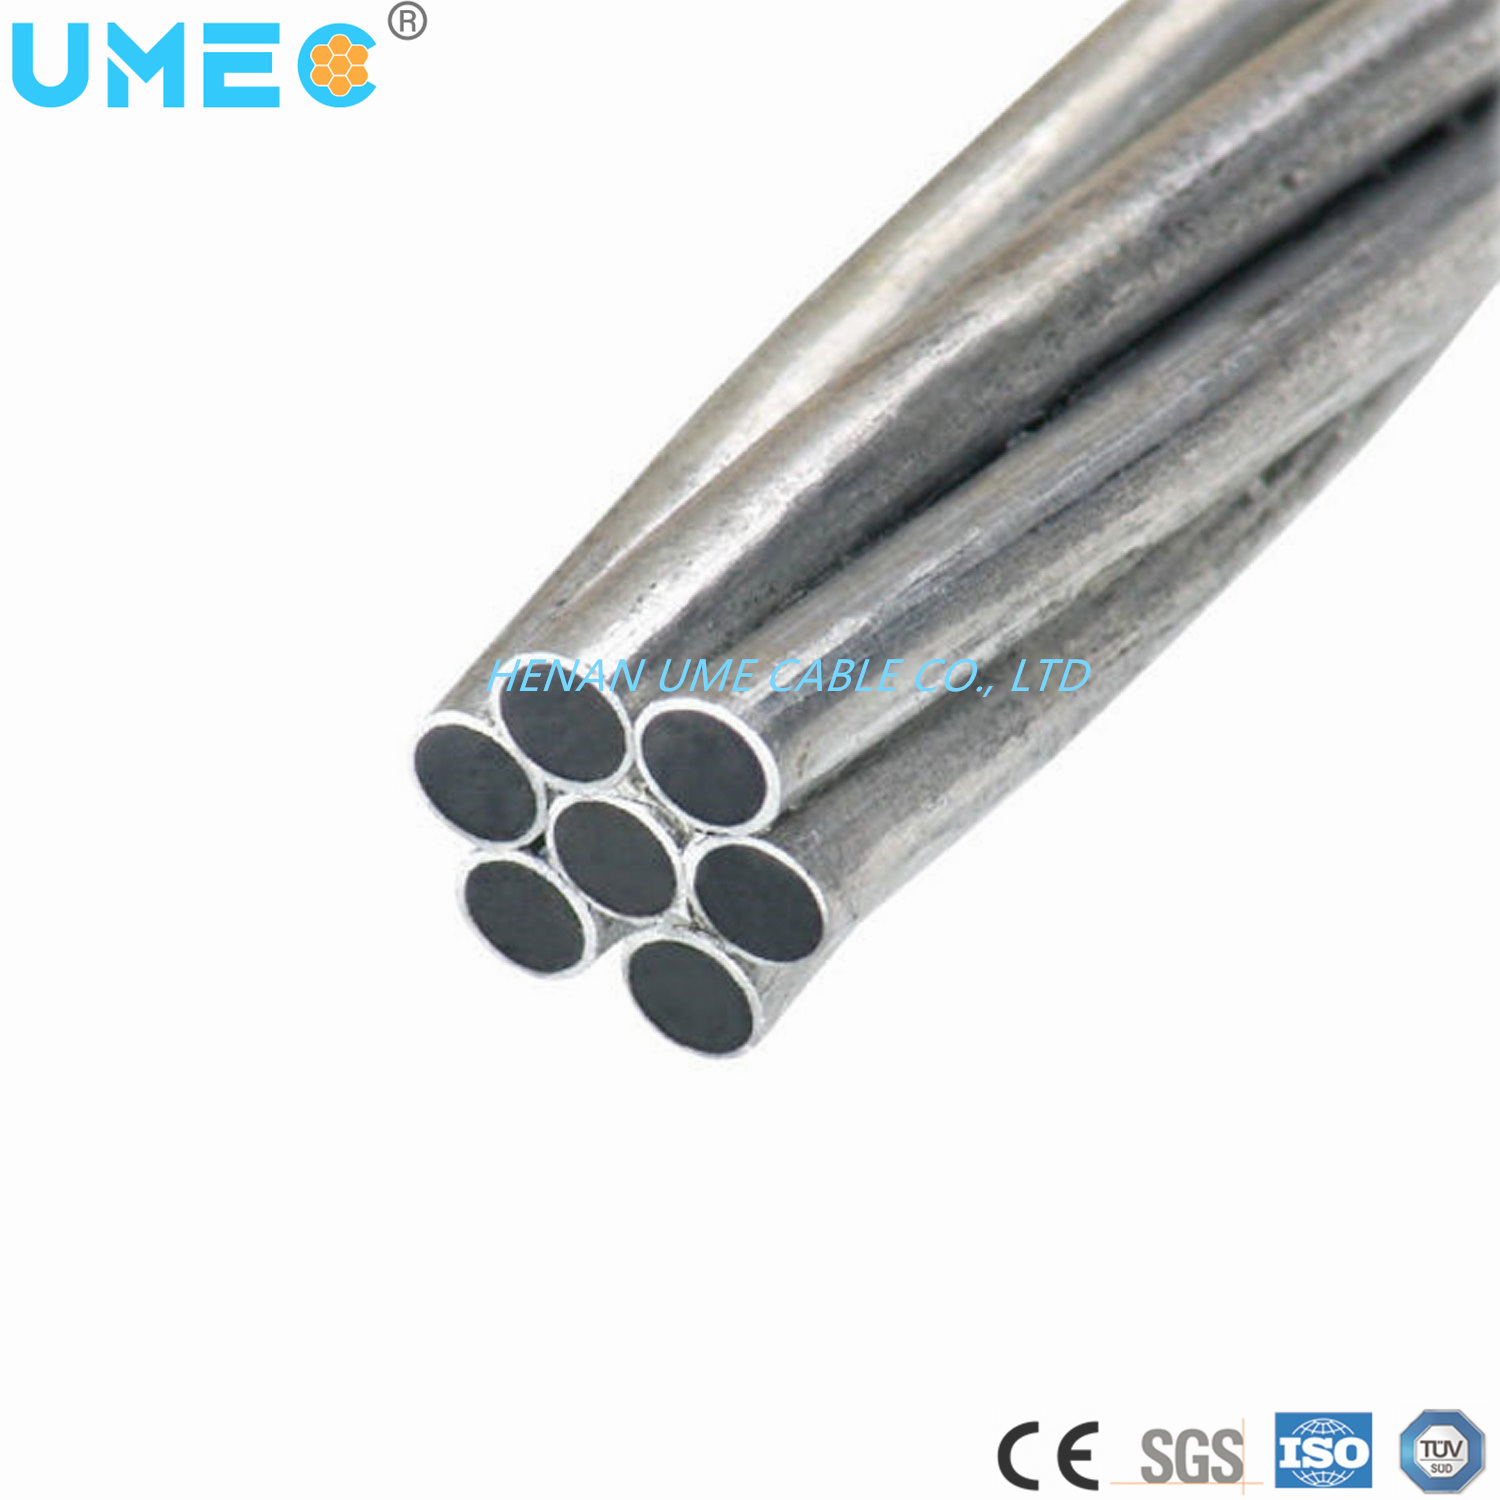 Standard Specification for Hard-Drawn Power Cable Aluminum Clad Steel Wire